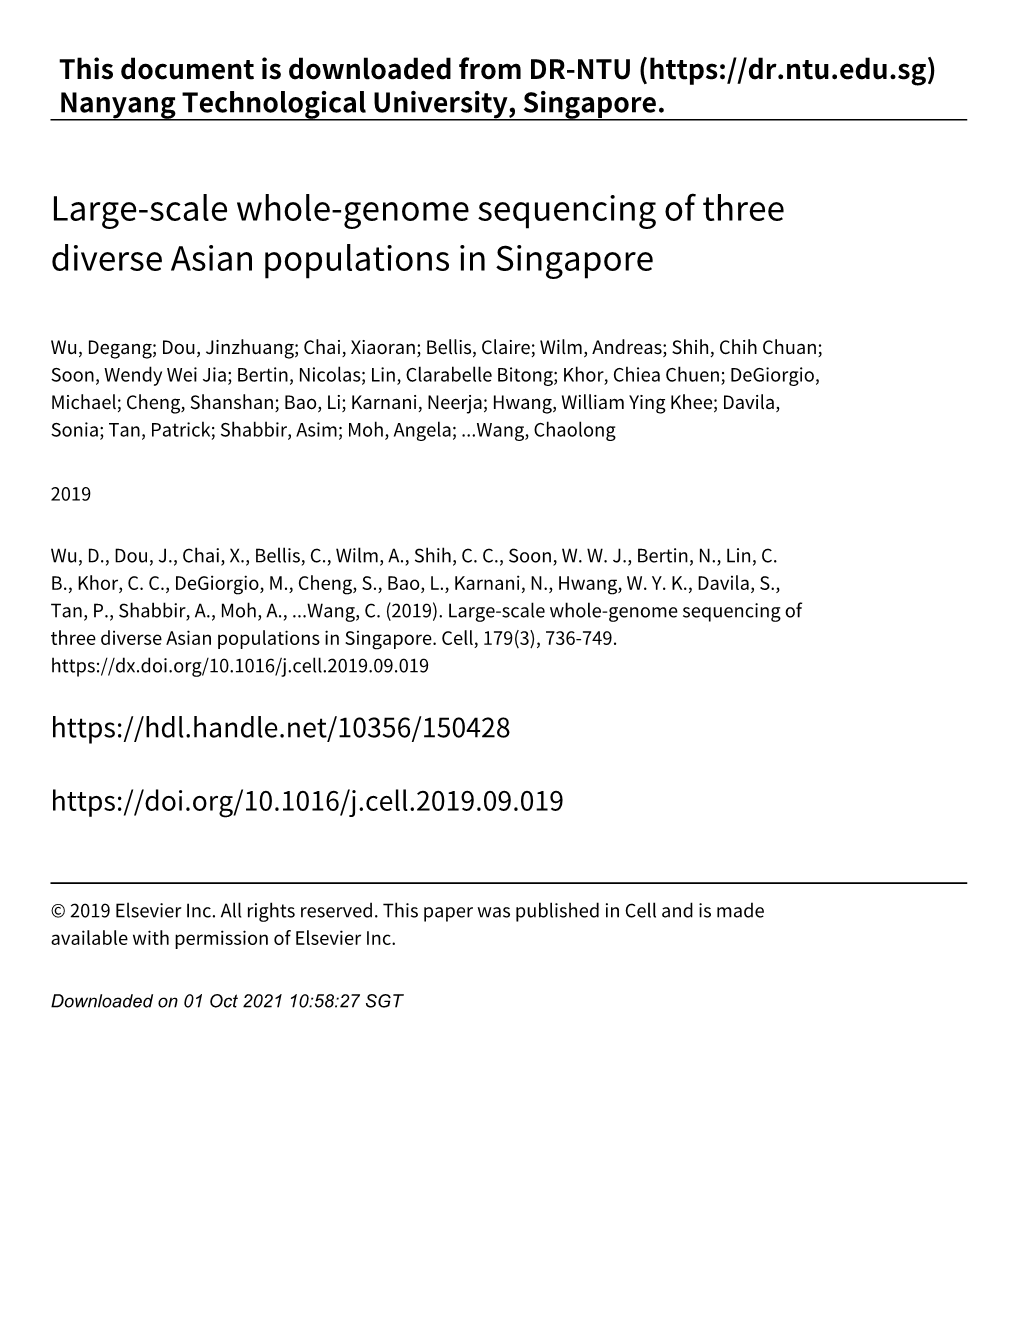 Large‑Scale Whole‑Genome Sequencing of Three Diverse Asian Populations in Singapore